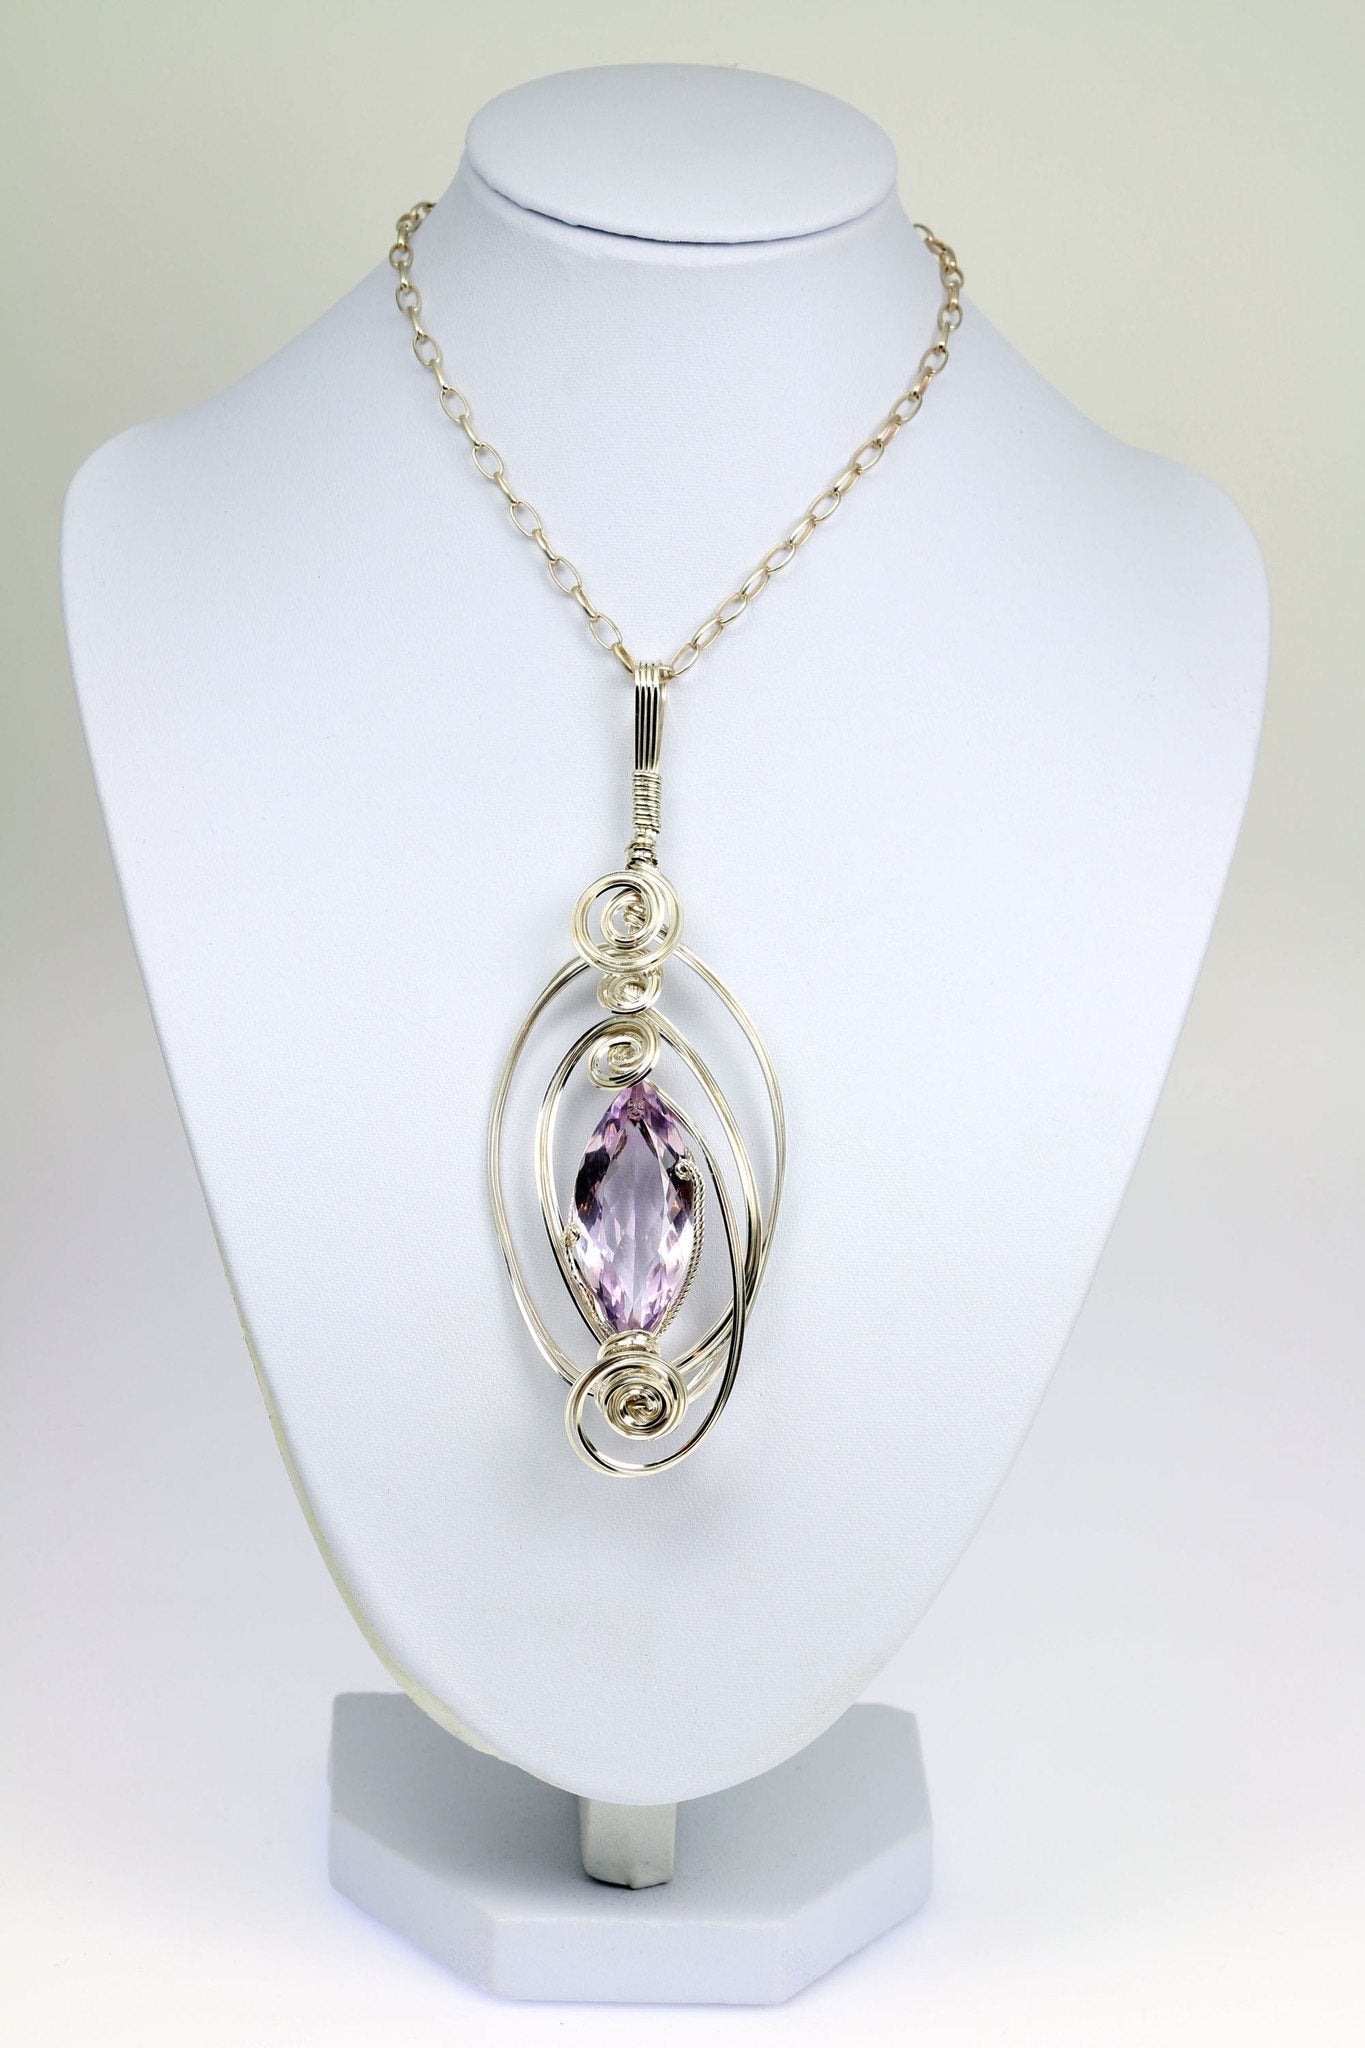 32.5 CT Marquise Cut Amethyst Silver Pendant on Chain